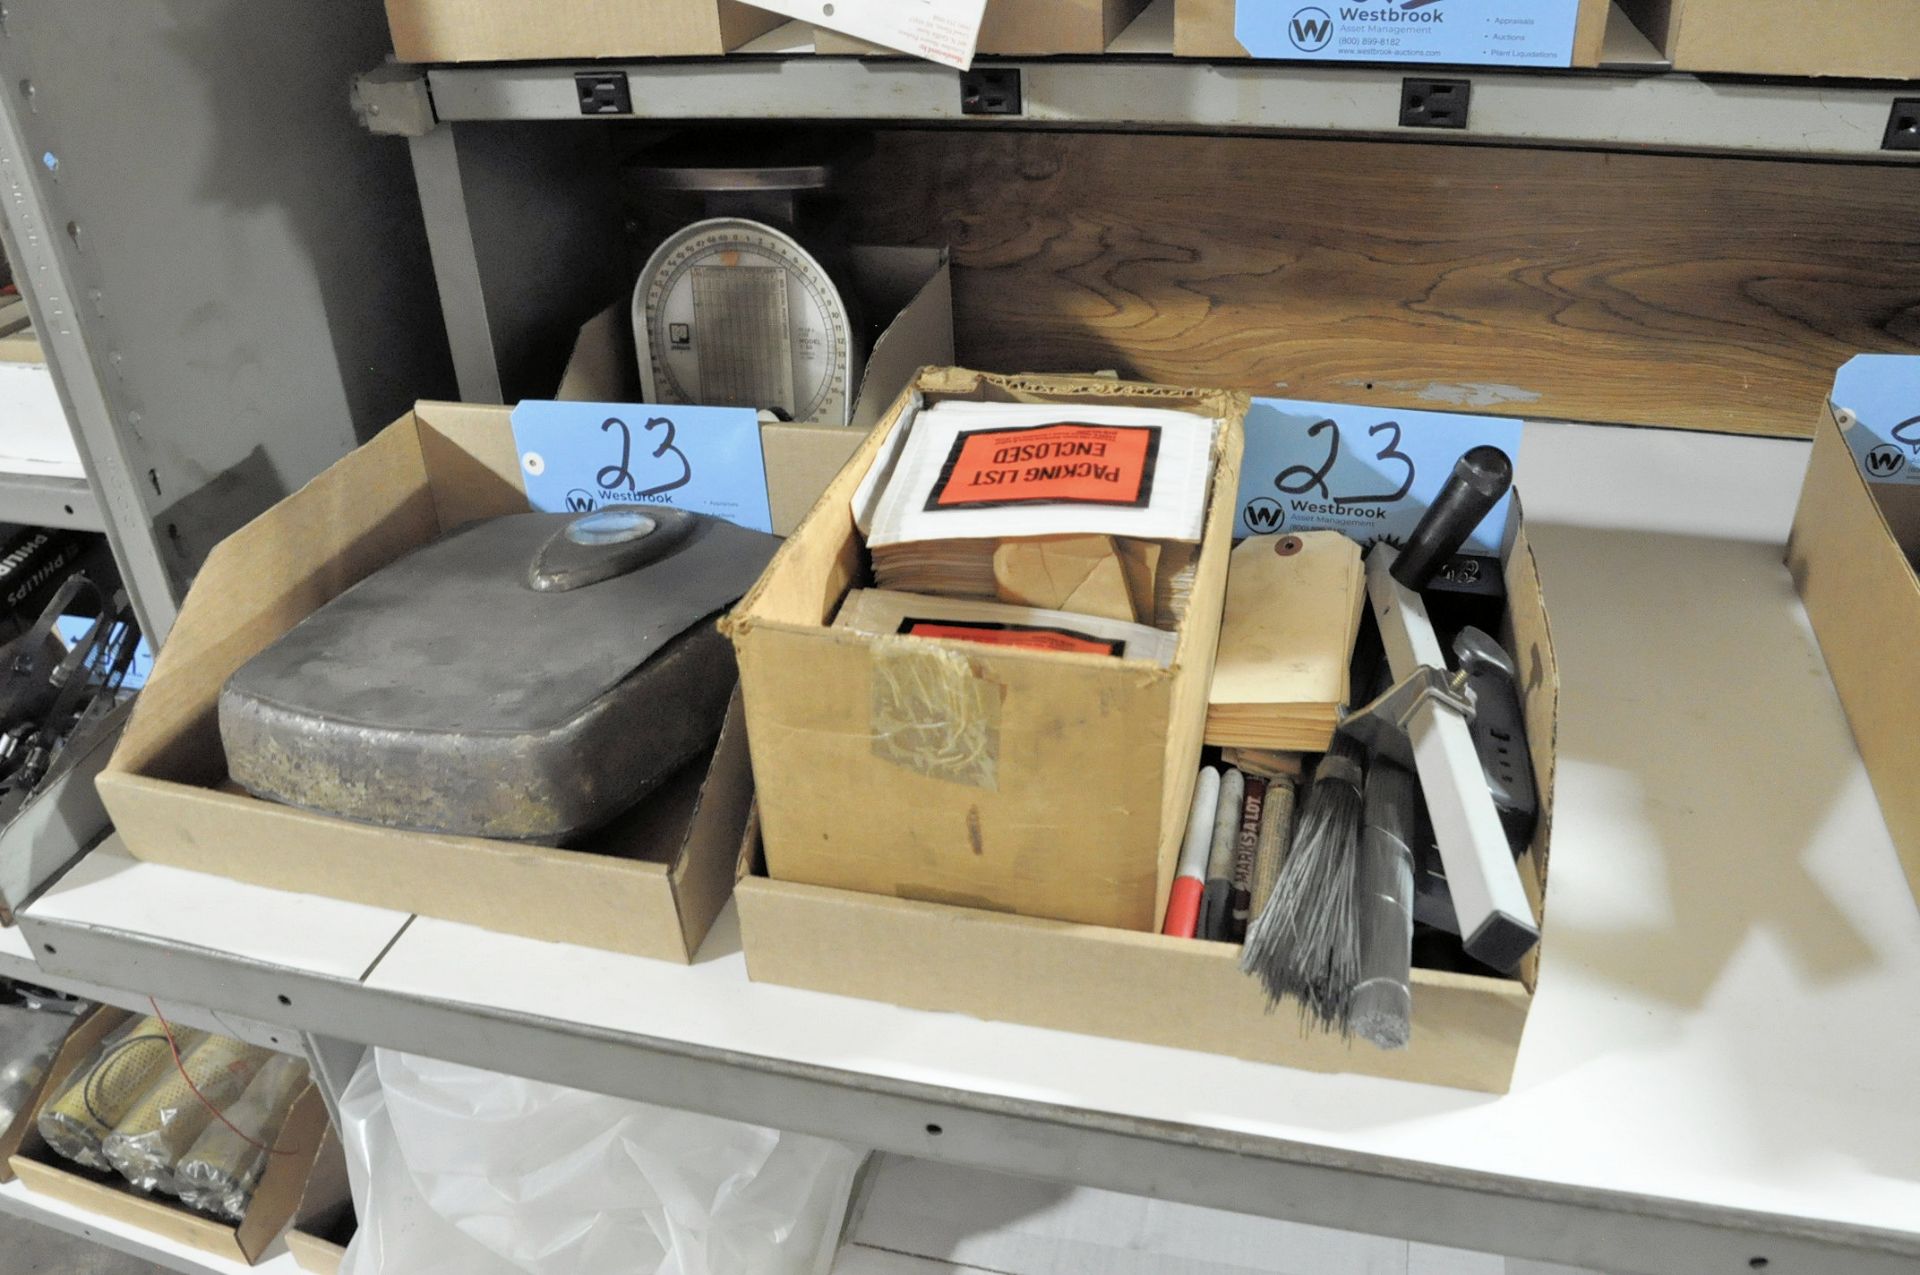 Lot-Packing Tape, Scales, Packing Slips, Tape Dispensers, Zip Bags, etc. - Image 2 of 3